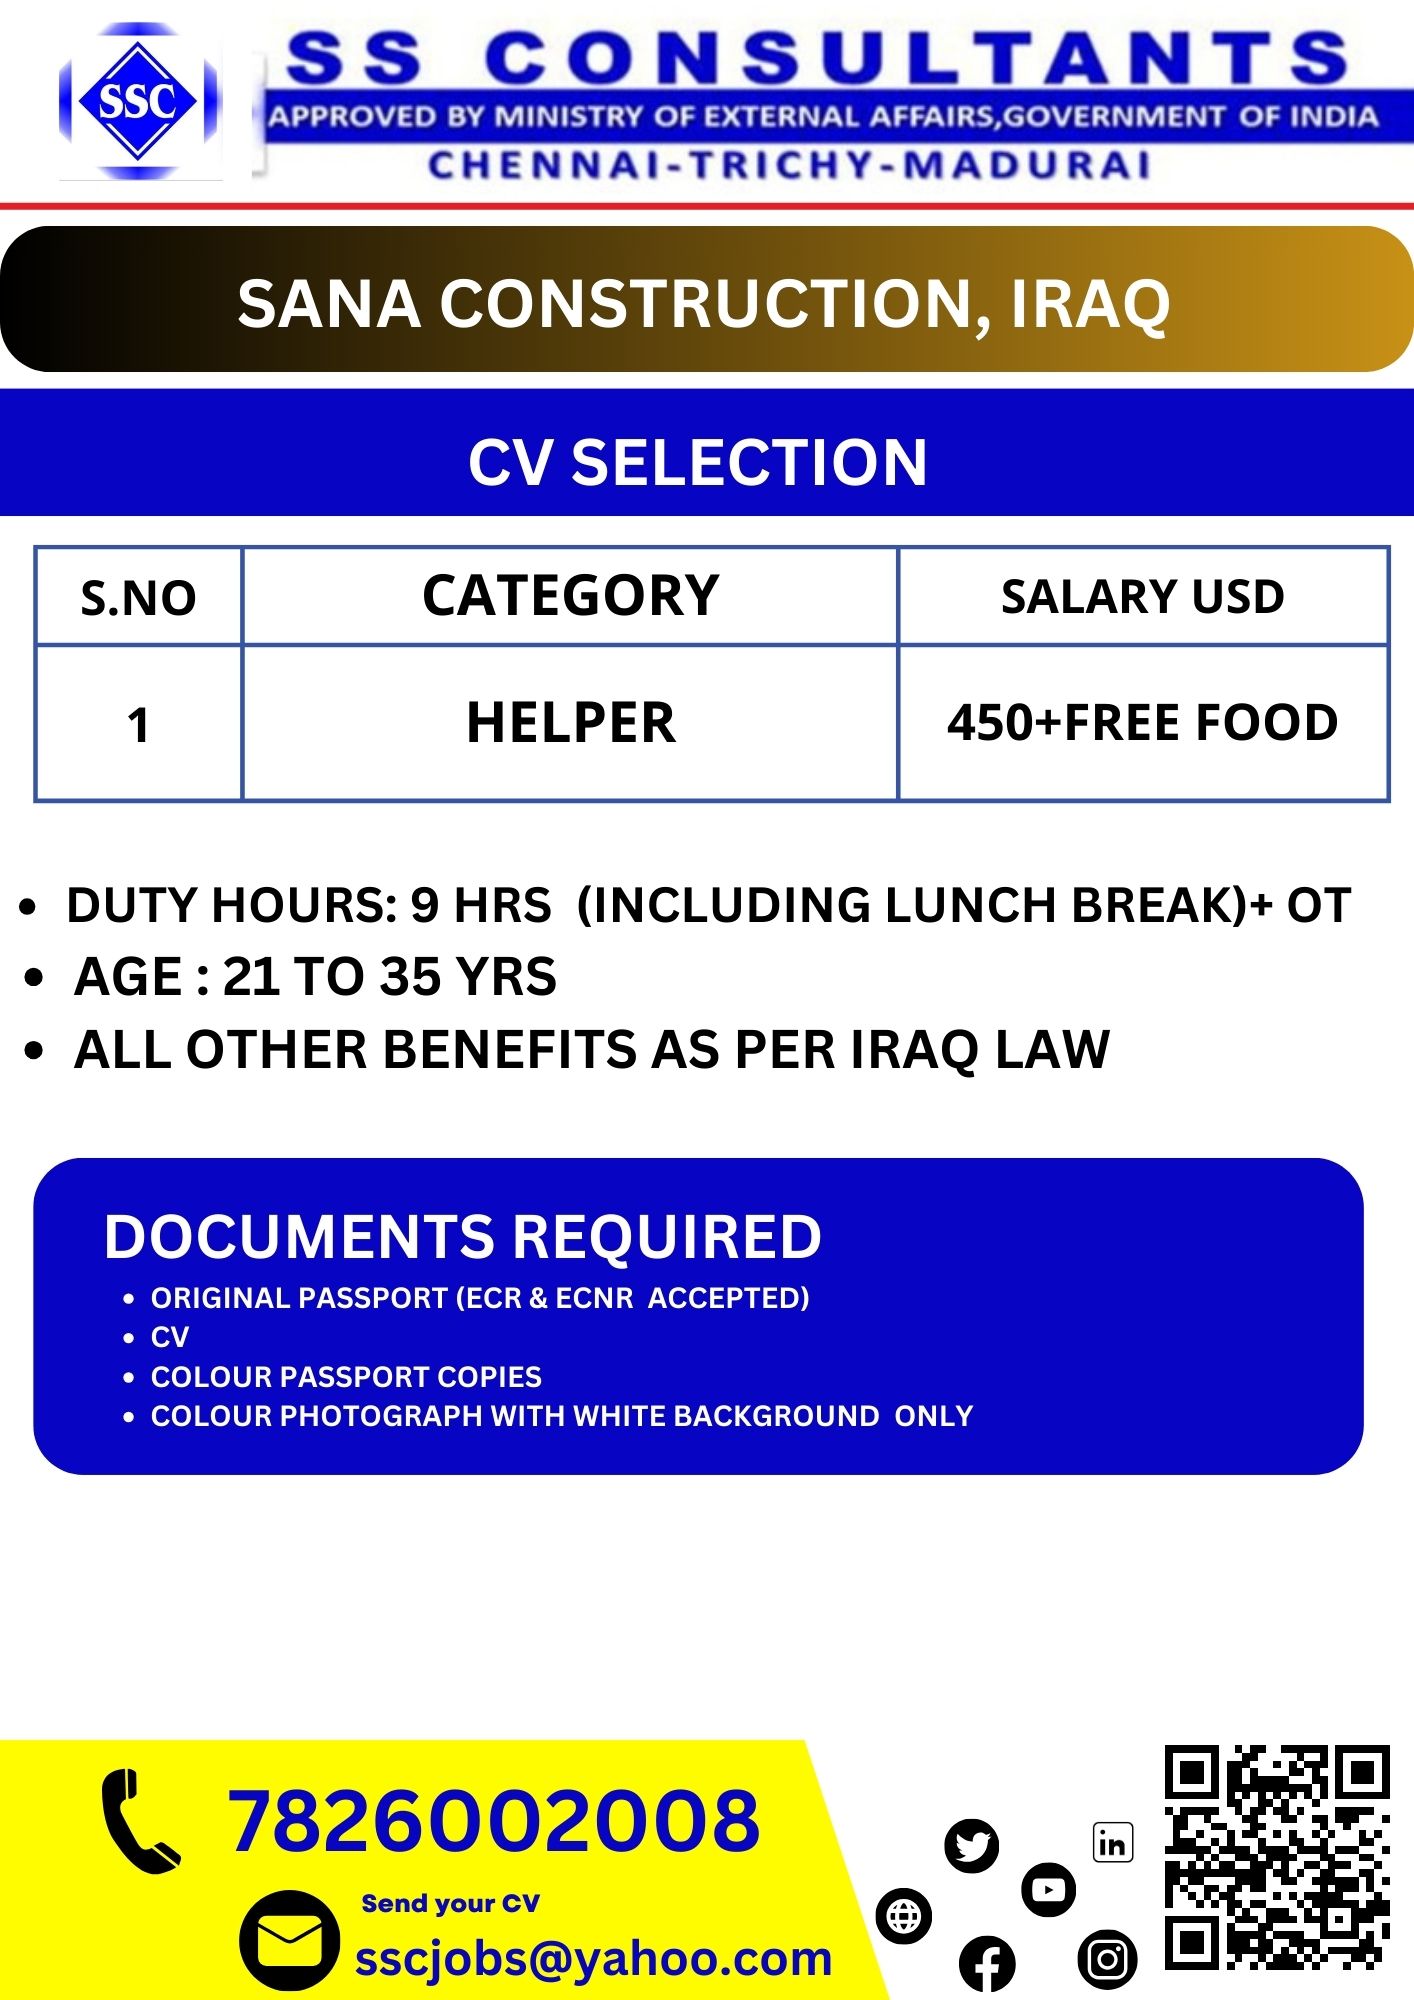 cv selection requirements 85